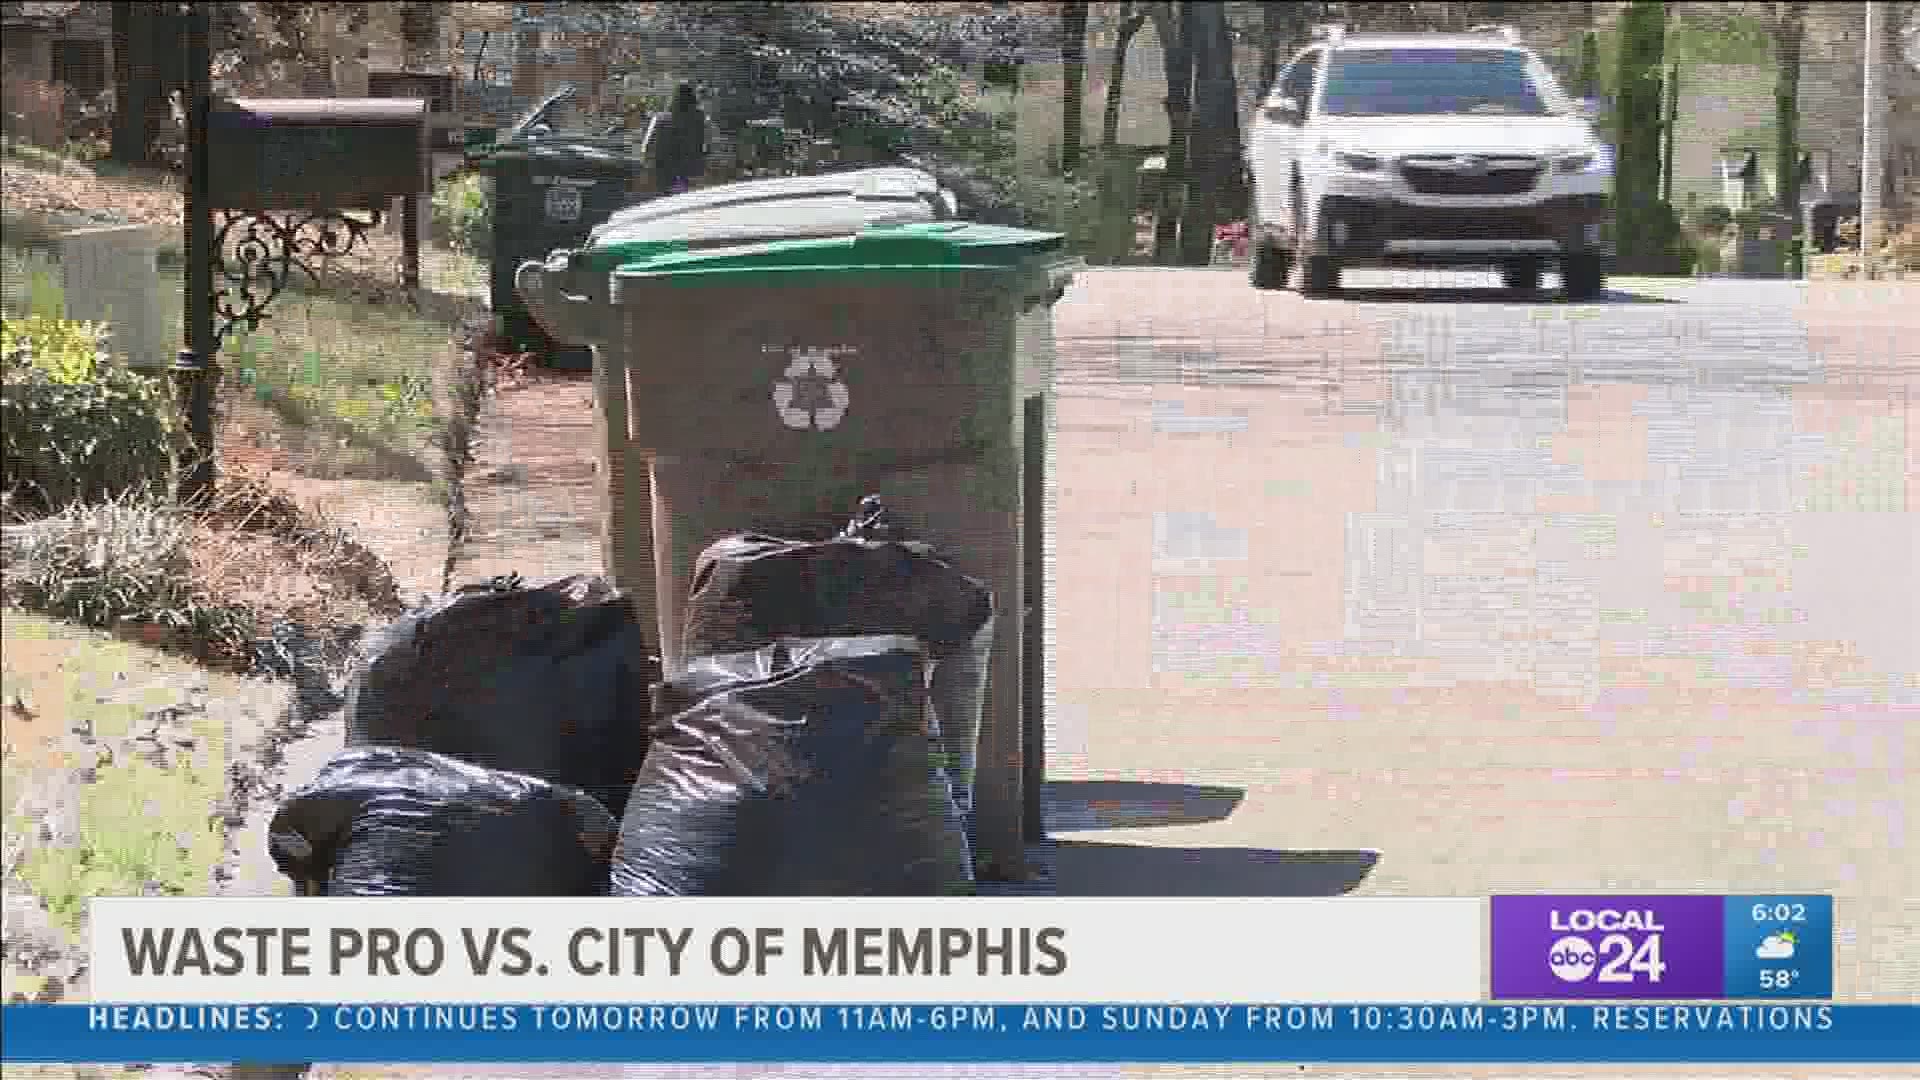 Those in Cordova claim trash pickup delays have been worsening in recent weeks.